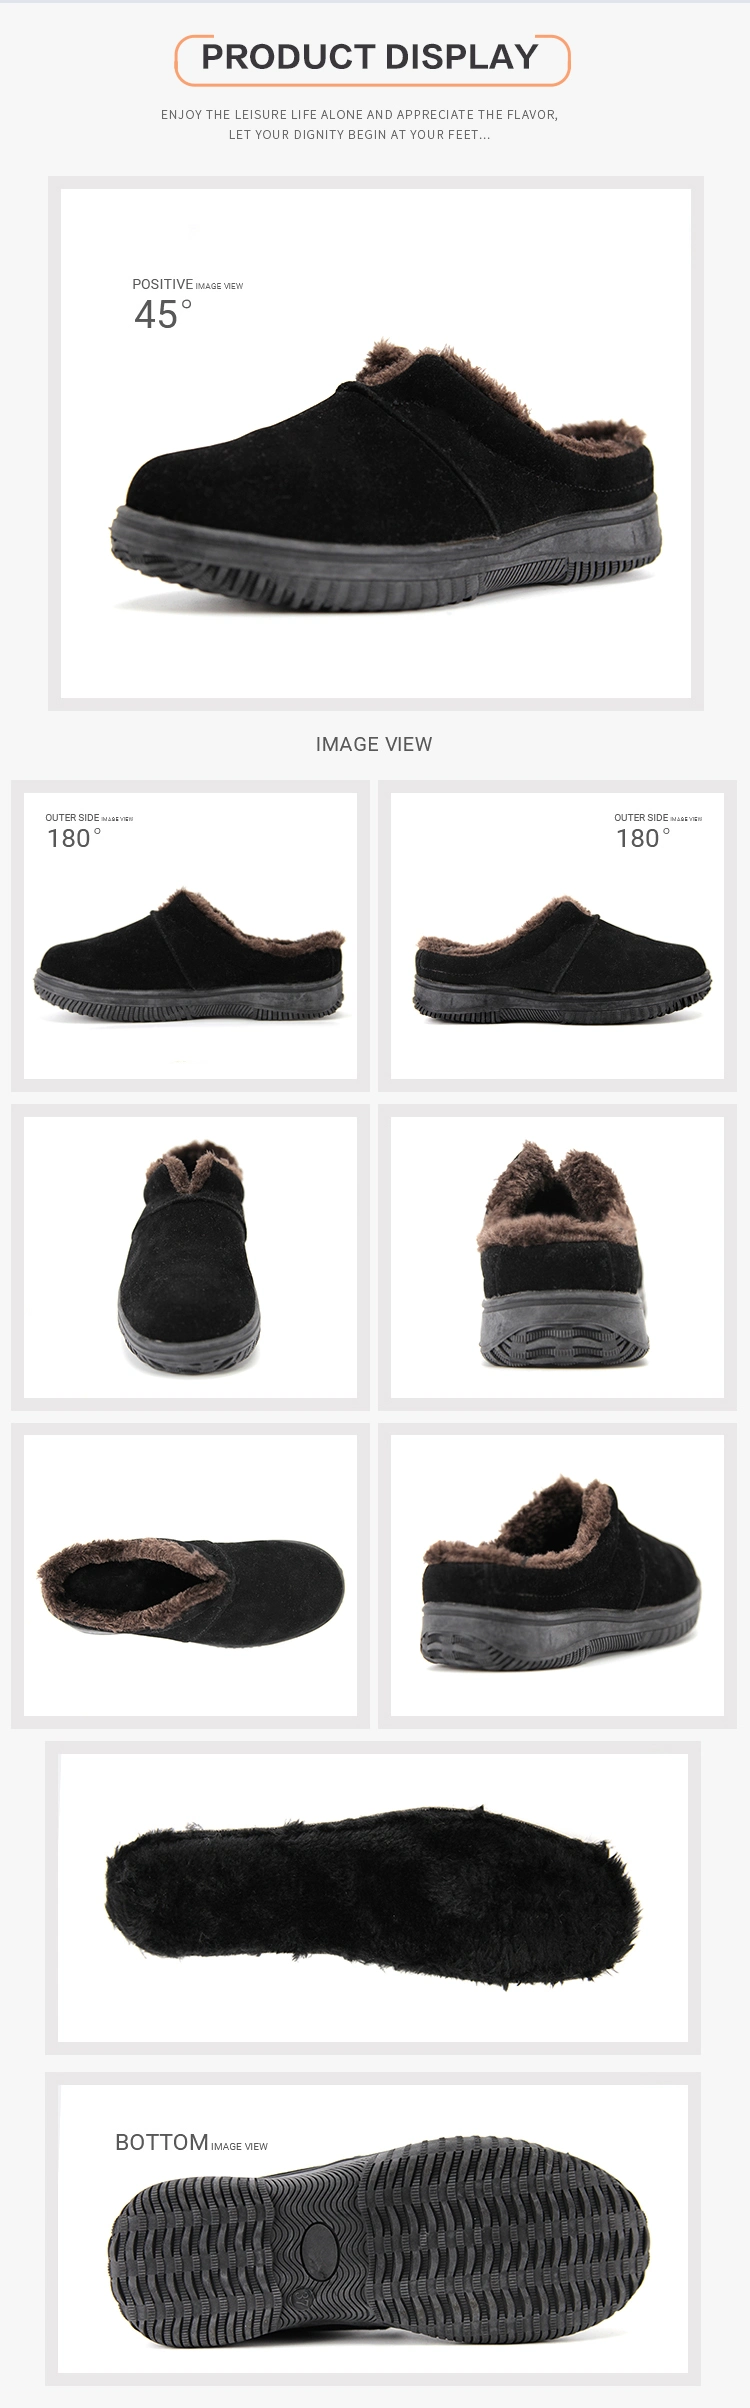 Casual Winter Snow Boots Women Natural Wool Fur Lined Ankle Warm Flat Shoes